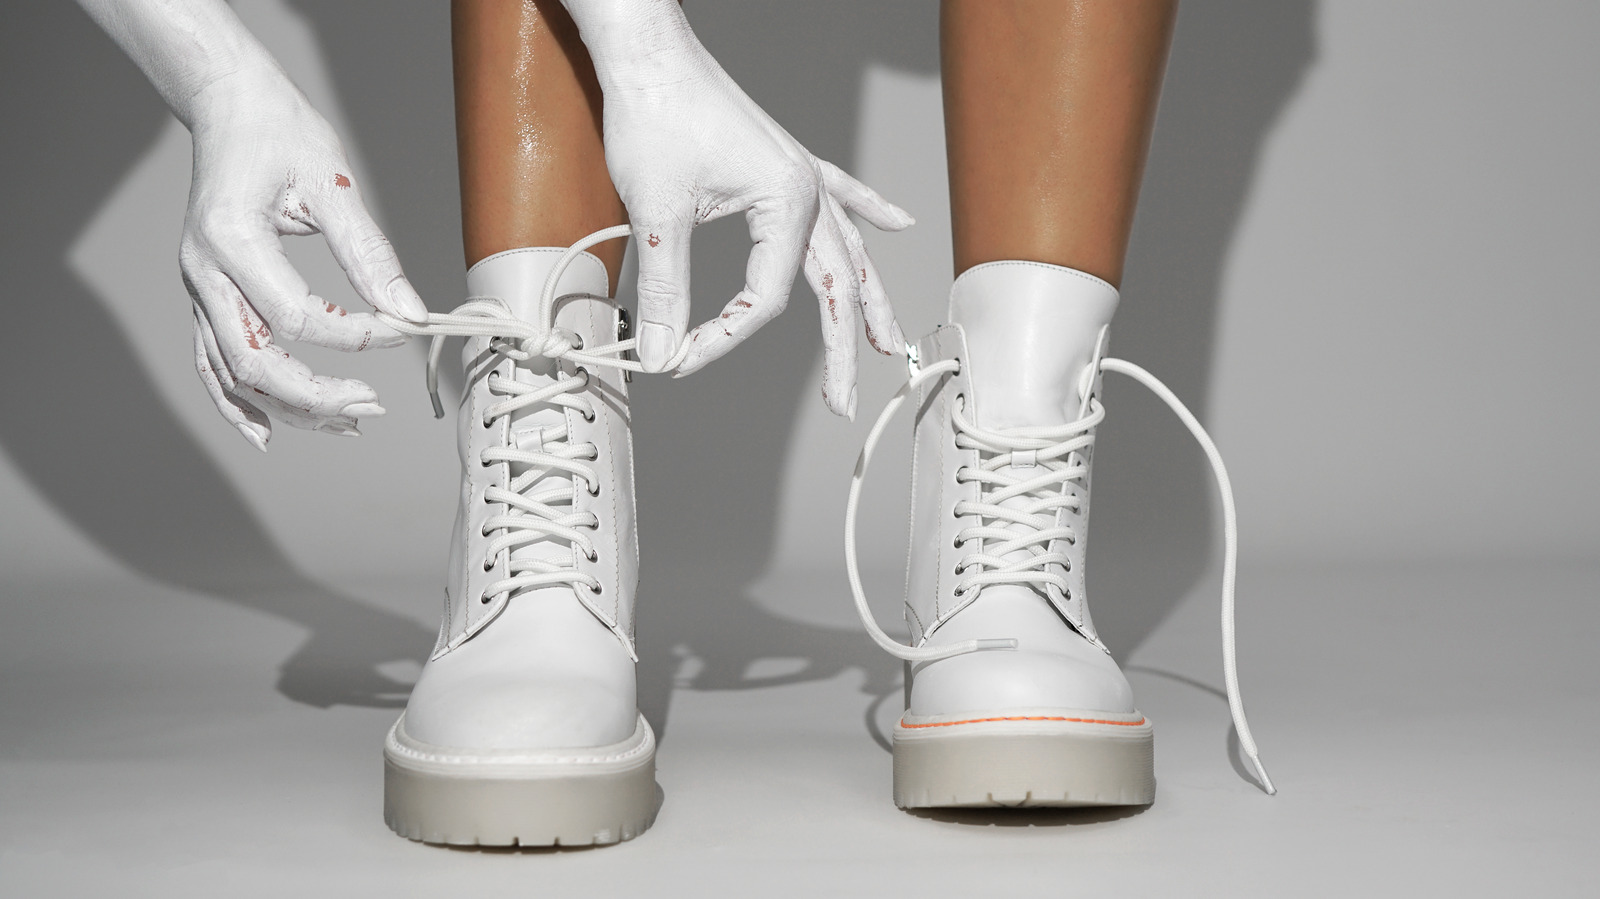 The Best Way To Turn Your White Boots Into A Fashion Statement